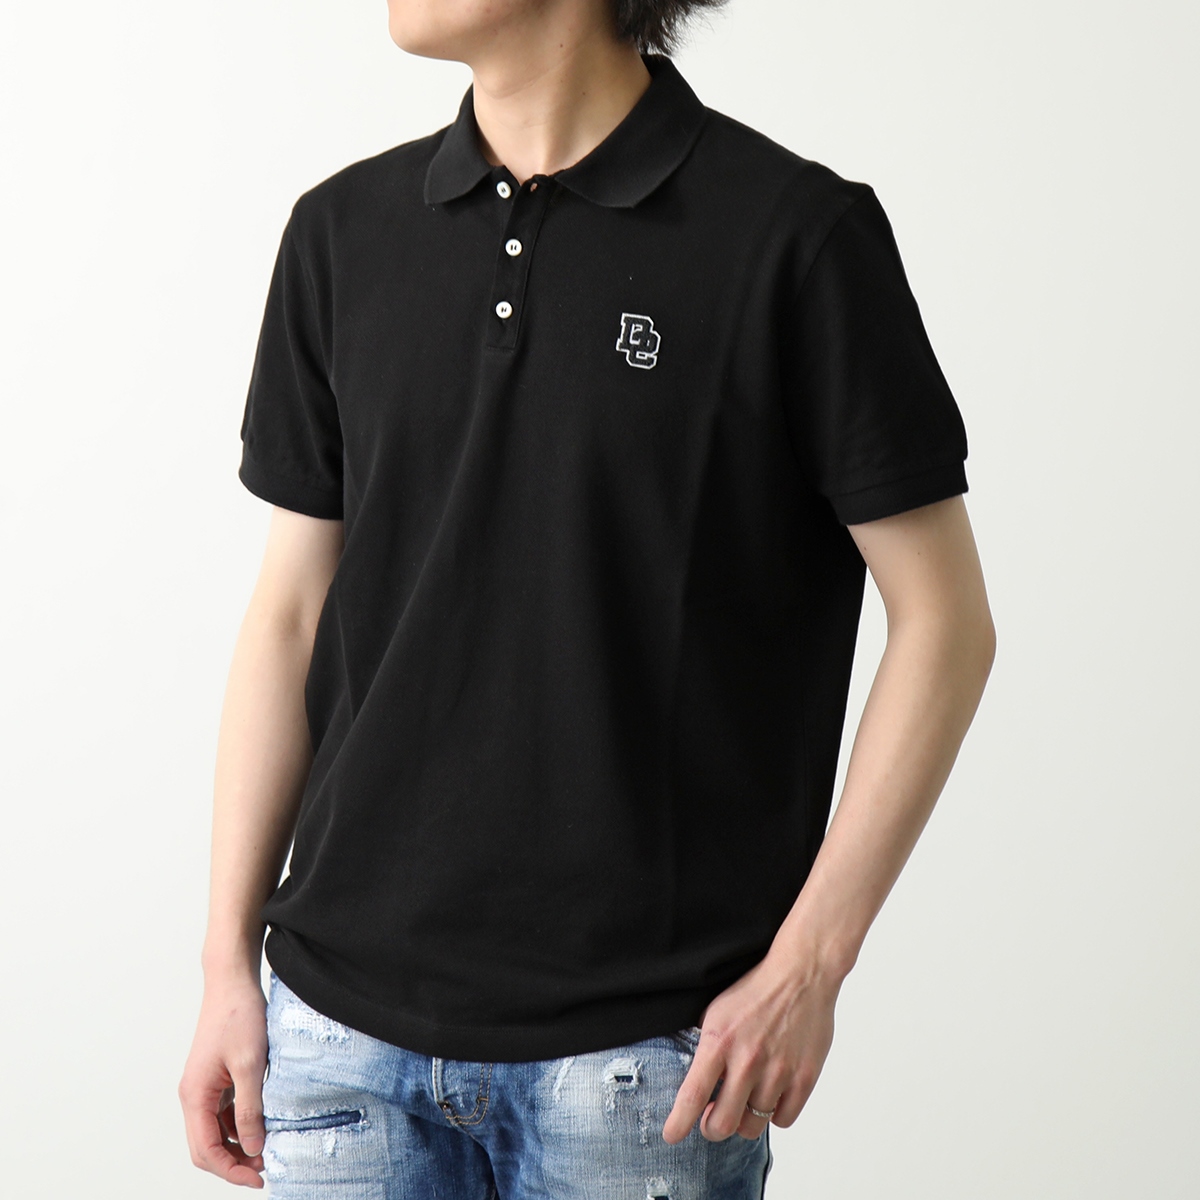 DSQUARED2 ディースクエアード ポロシャツ Tennis Fit Polo S74GL0078 S22743 メンズ 半袖 ロゴパッチ  コットン 900